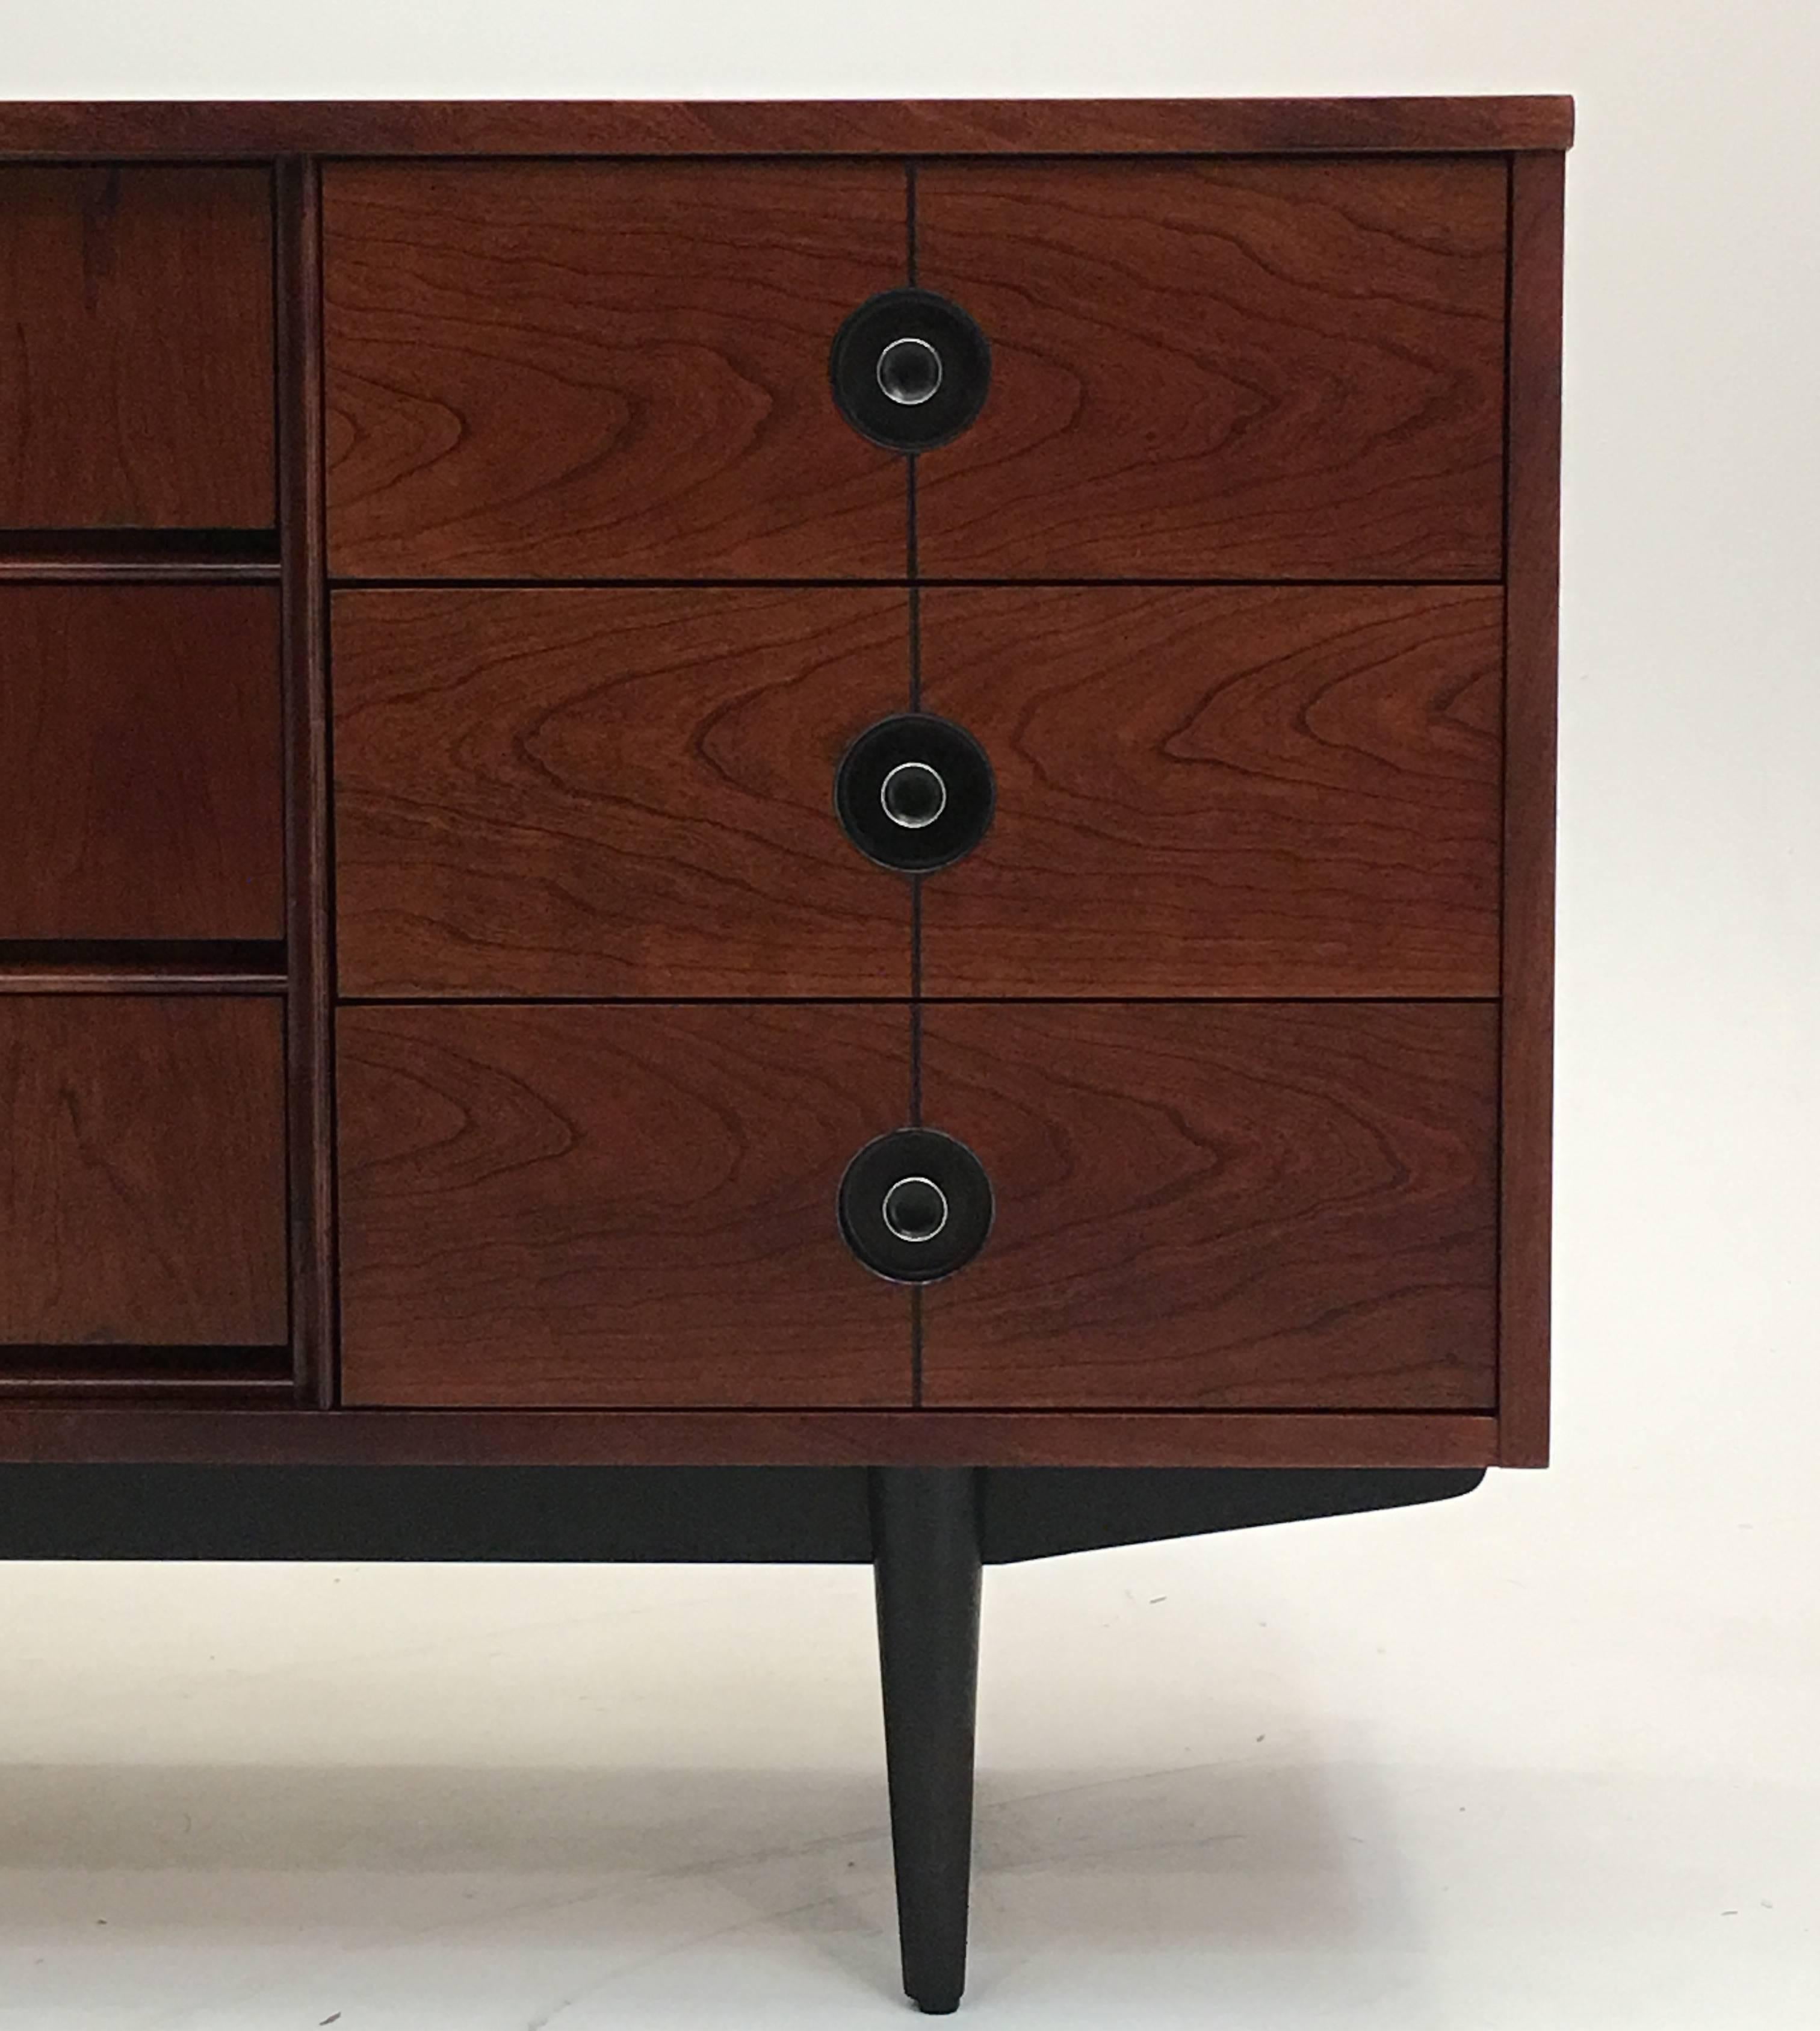 Distinctive Furniture by Stanley; the Finnline Series, triple dresser.

A gentlemen's chest is also on offer in our other listings for those seeking a matched bedroom suite. Exceptional and fine cherry has been used coupled with ebony lines and